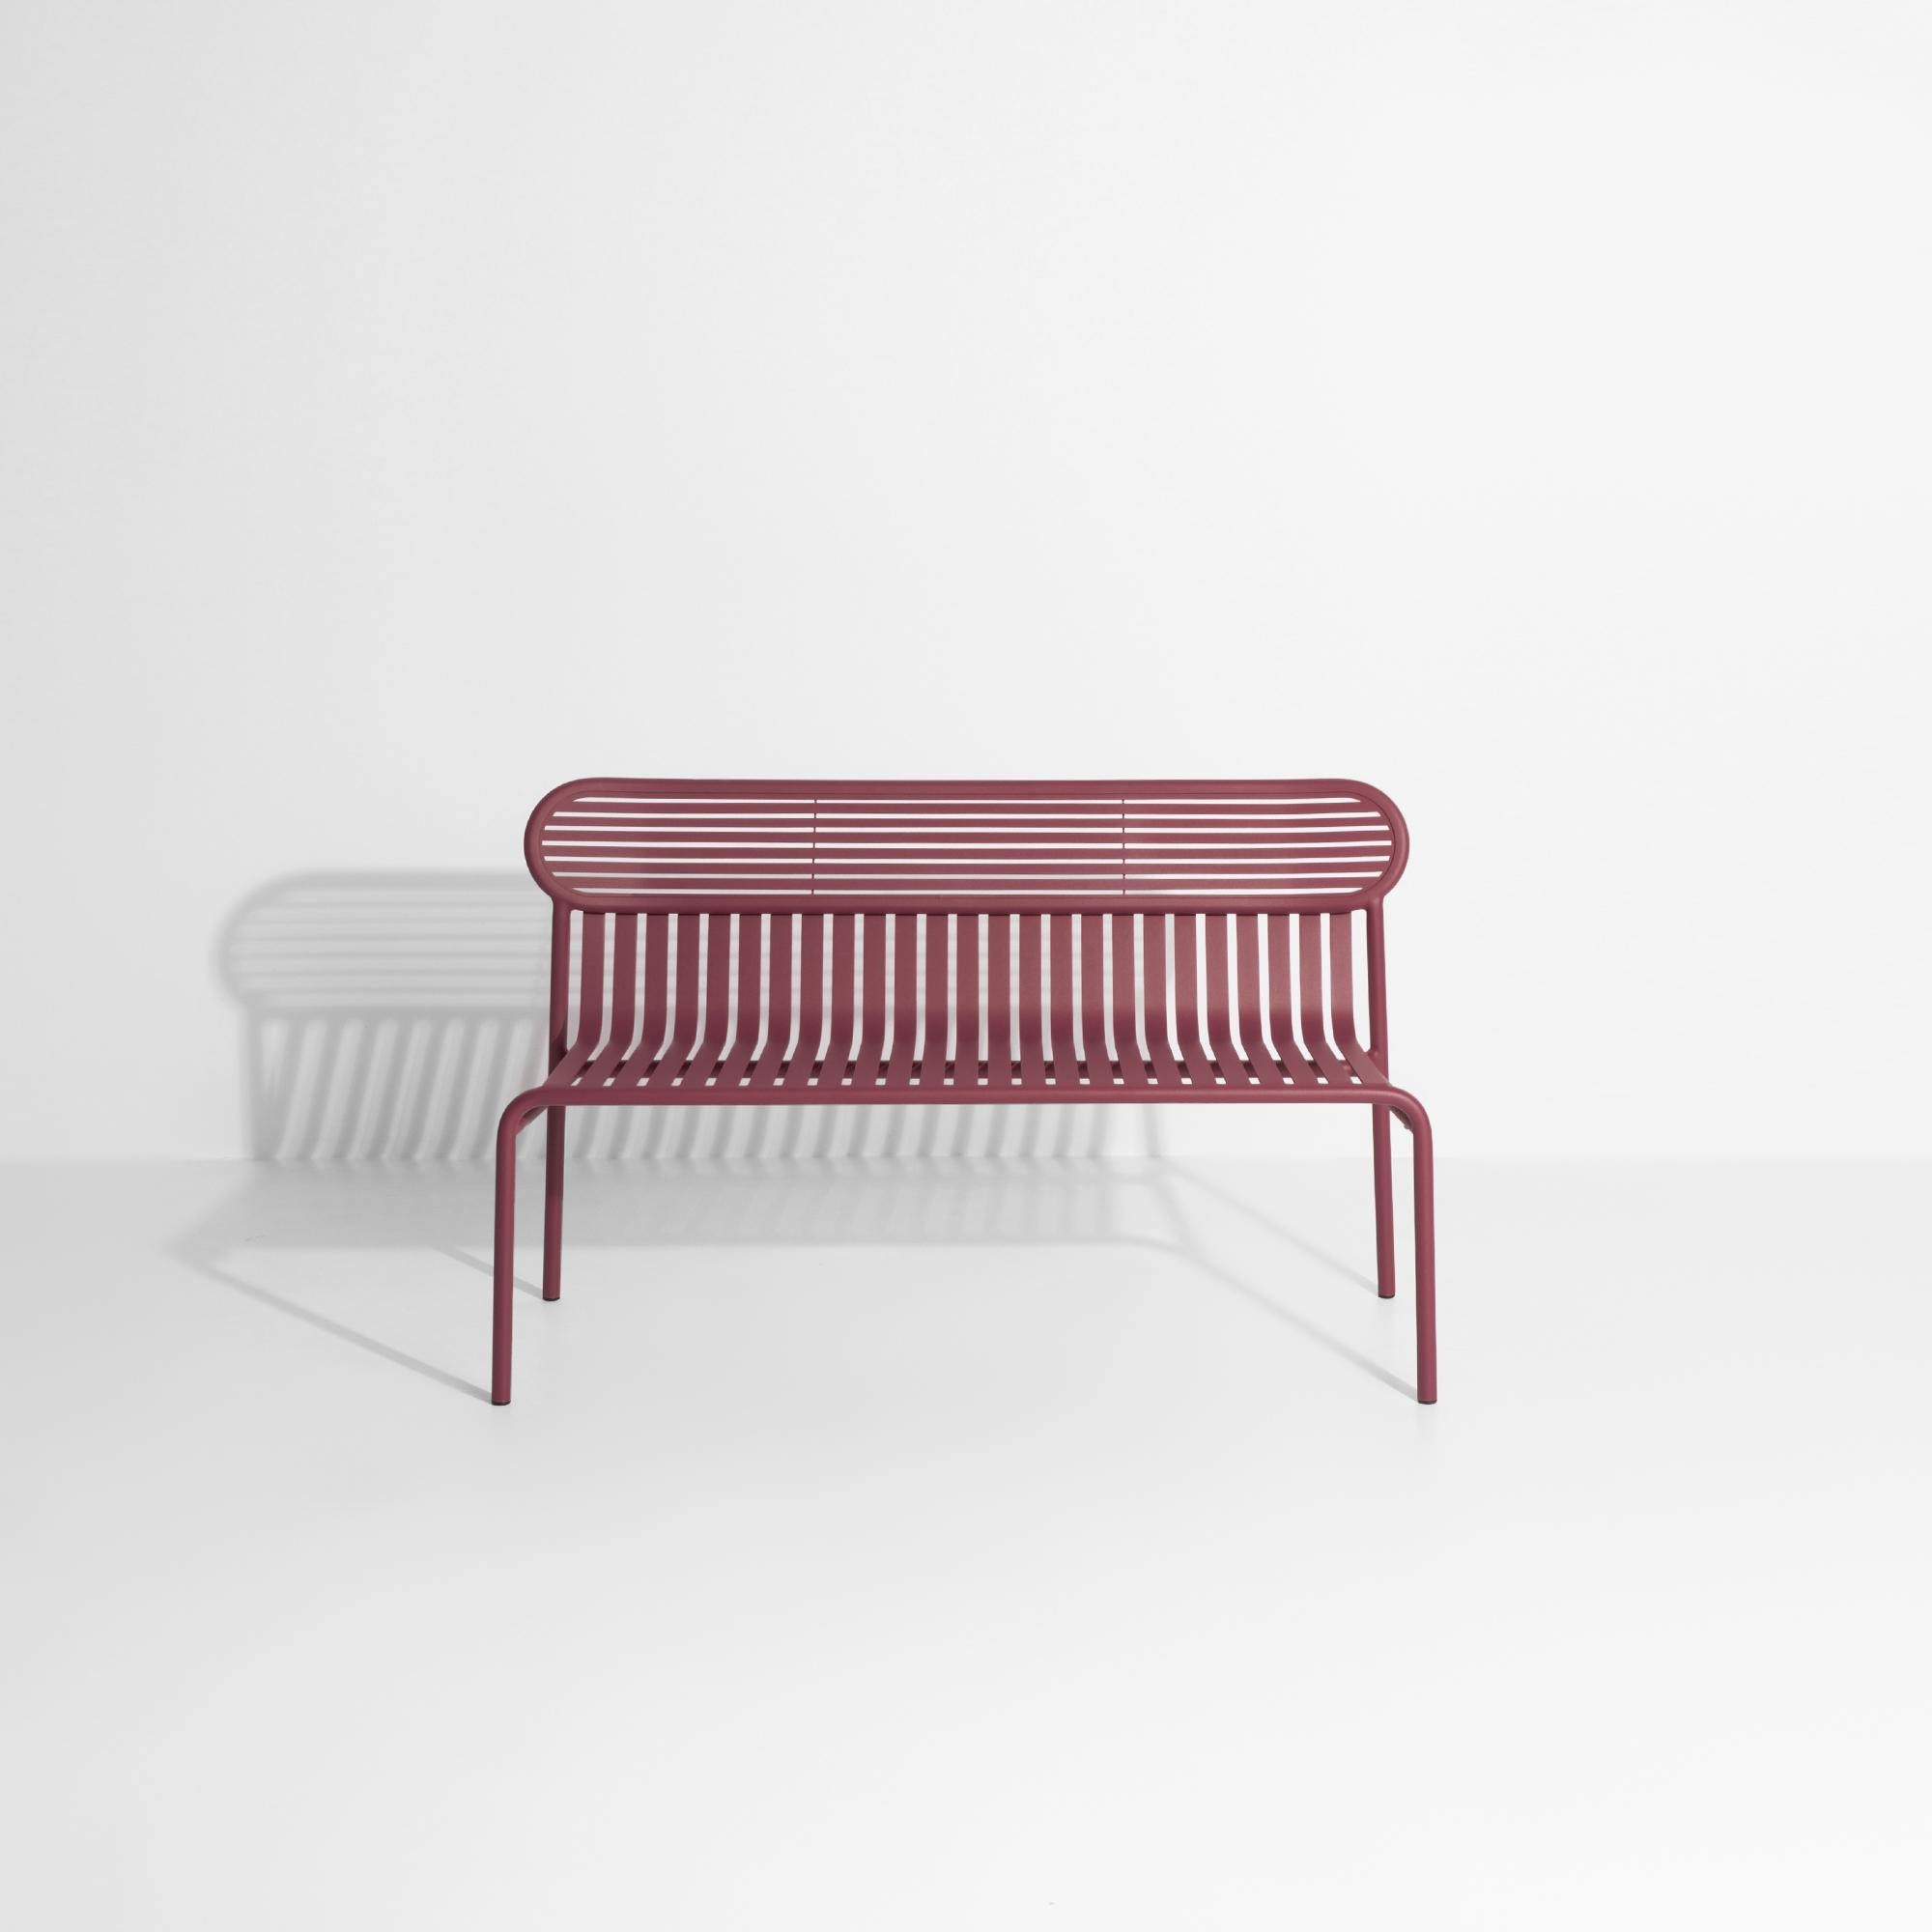 Petite Friture Week-End Bench in Burgundy Aluminium by Studio BrichetZiegler In New Condition For Sale In Brooklyn, NY